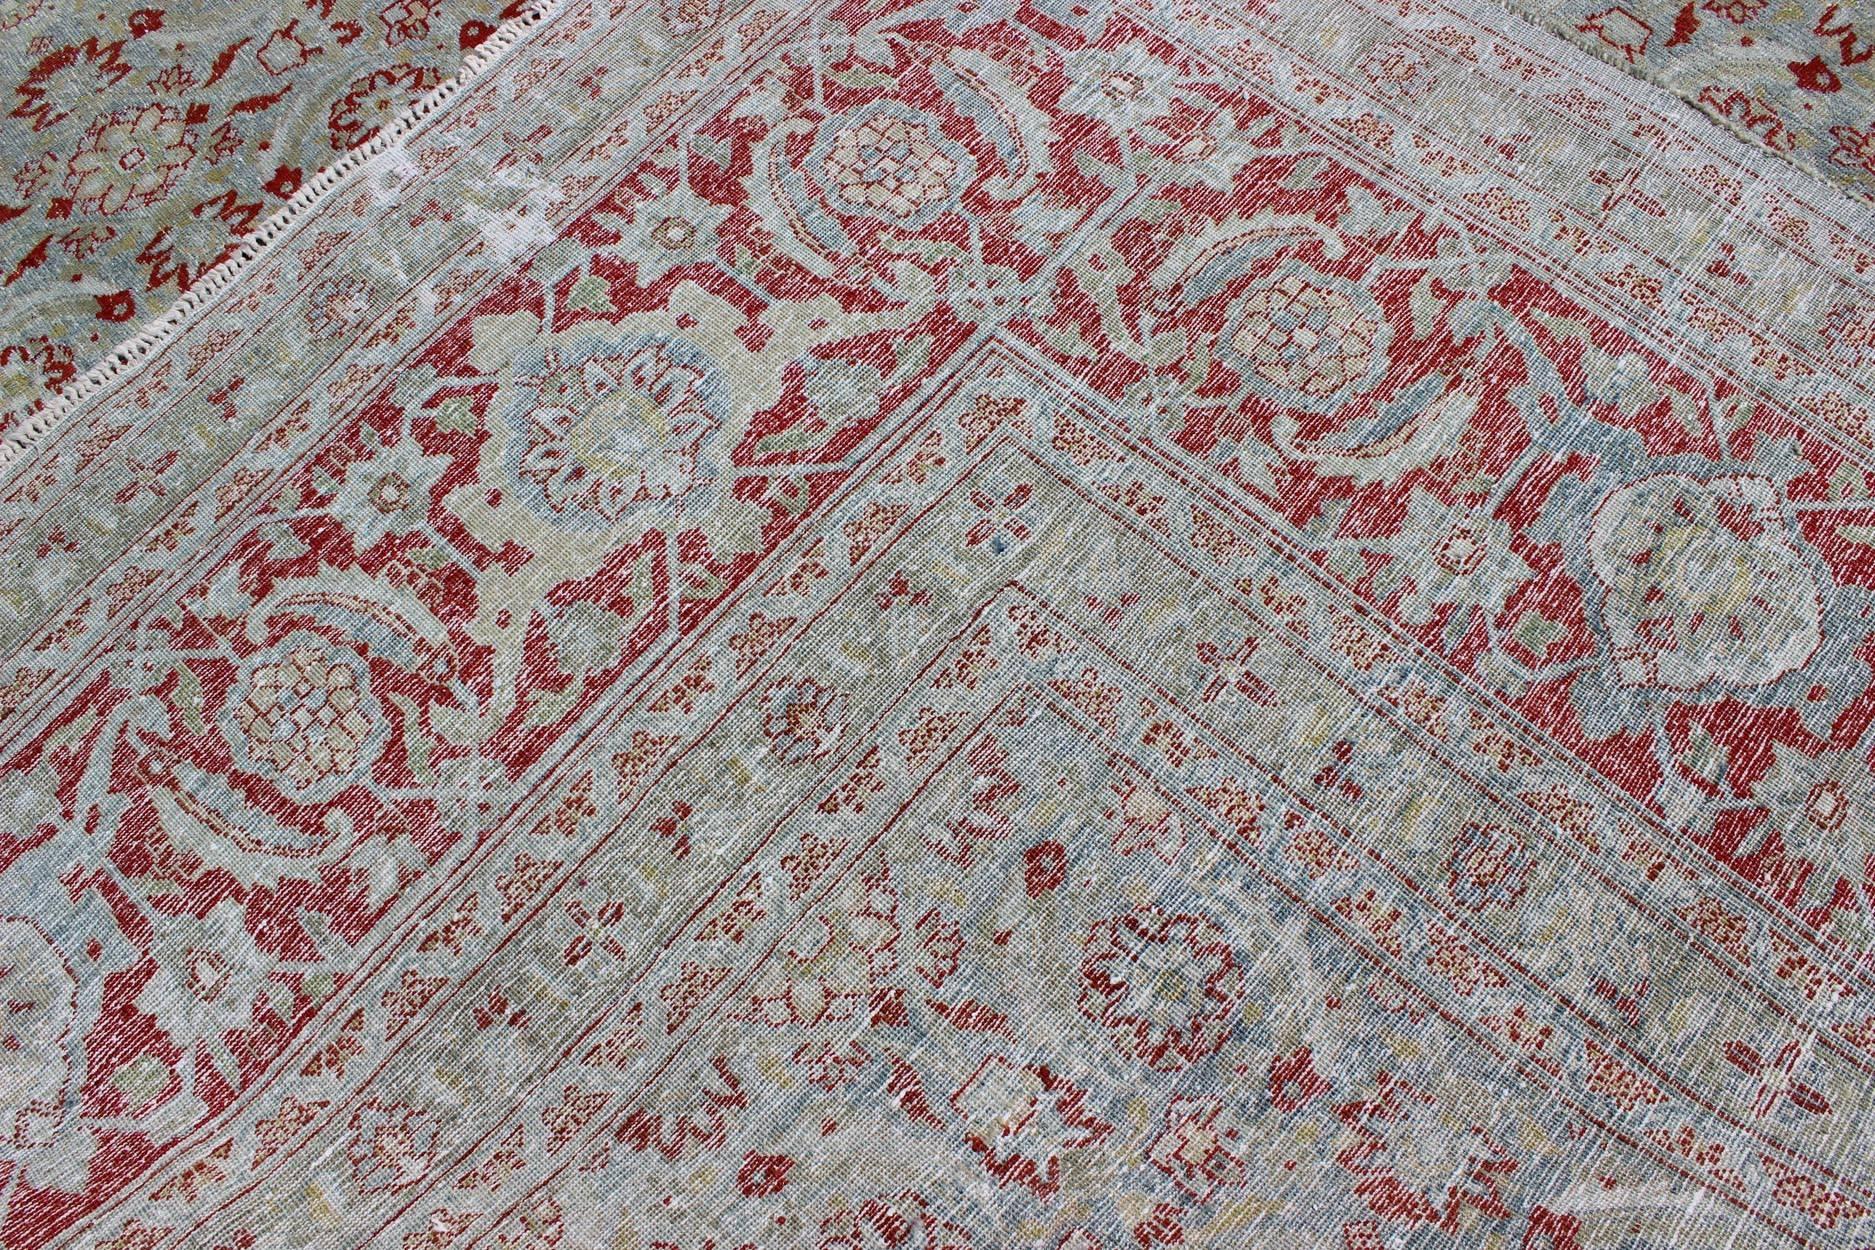 All-Over Floral Design Antique Persian Tabriz Rug in Shades of Gray-Blue and Red For Sale 1